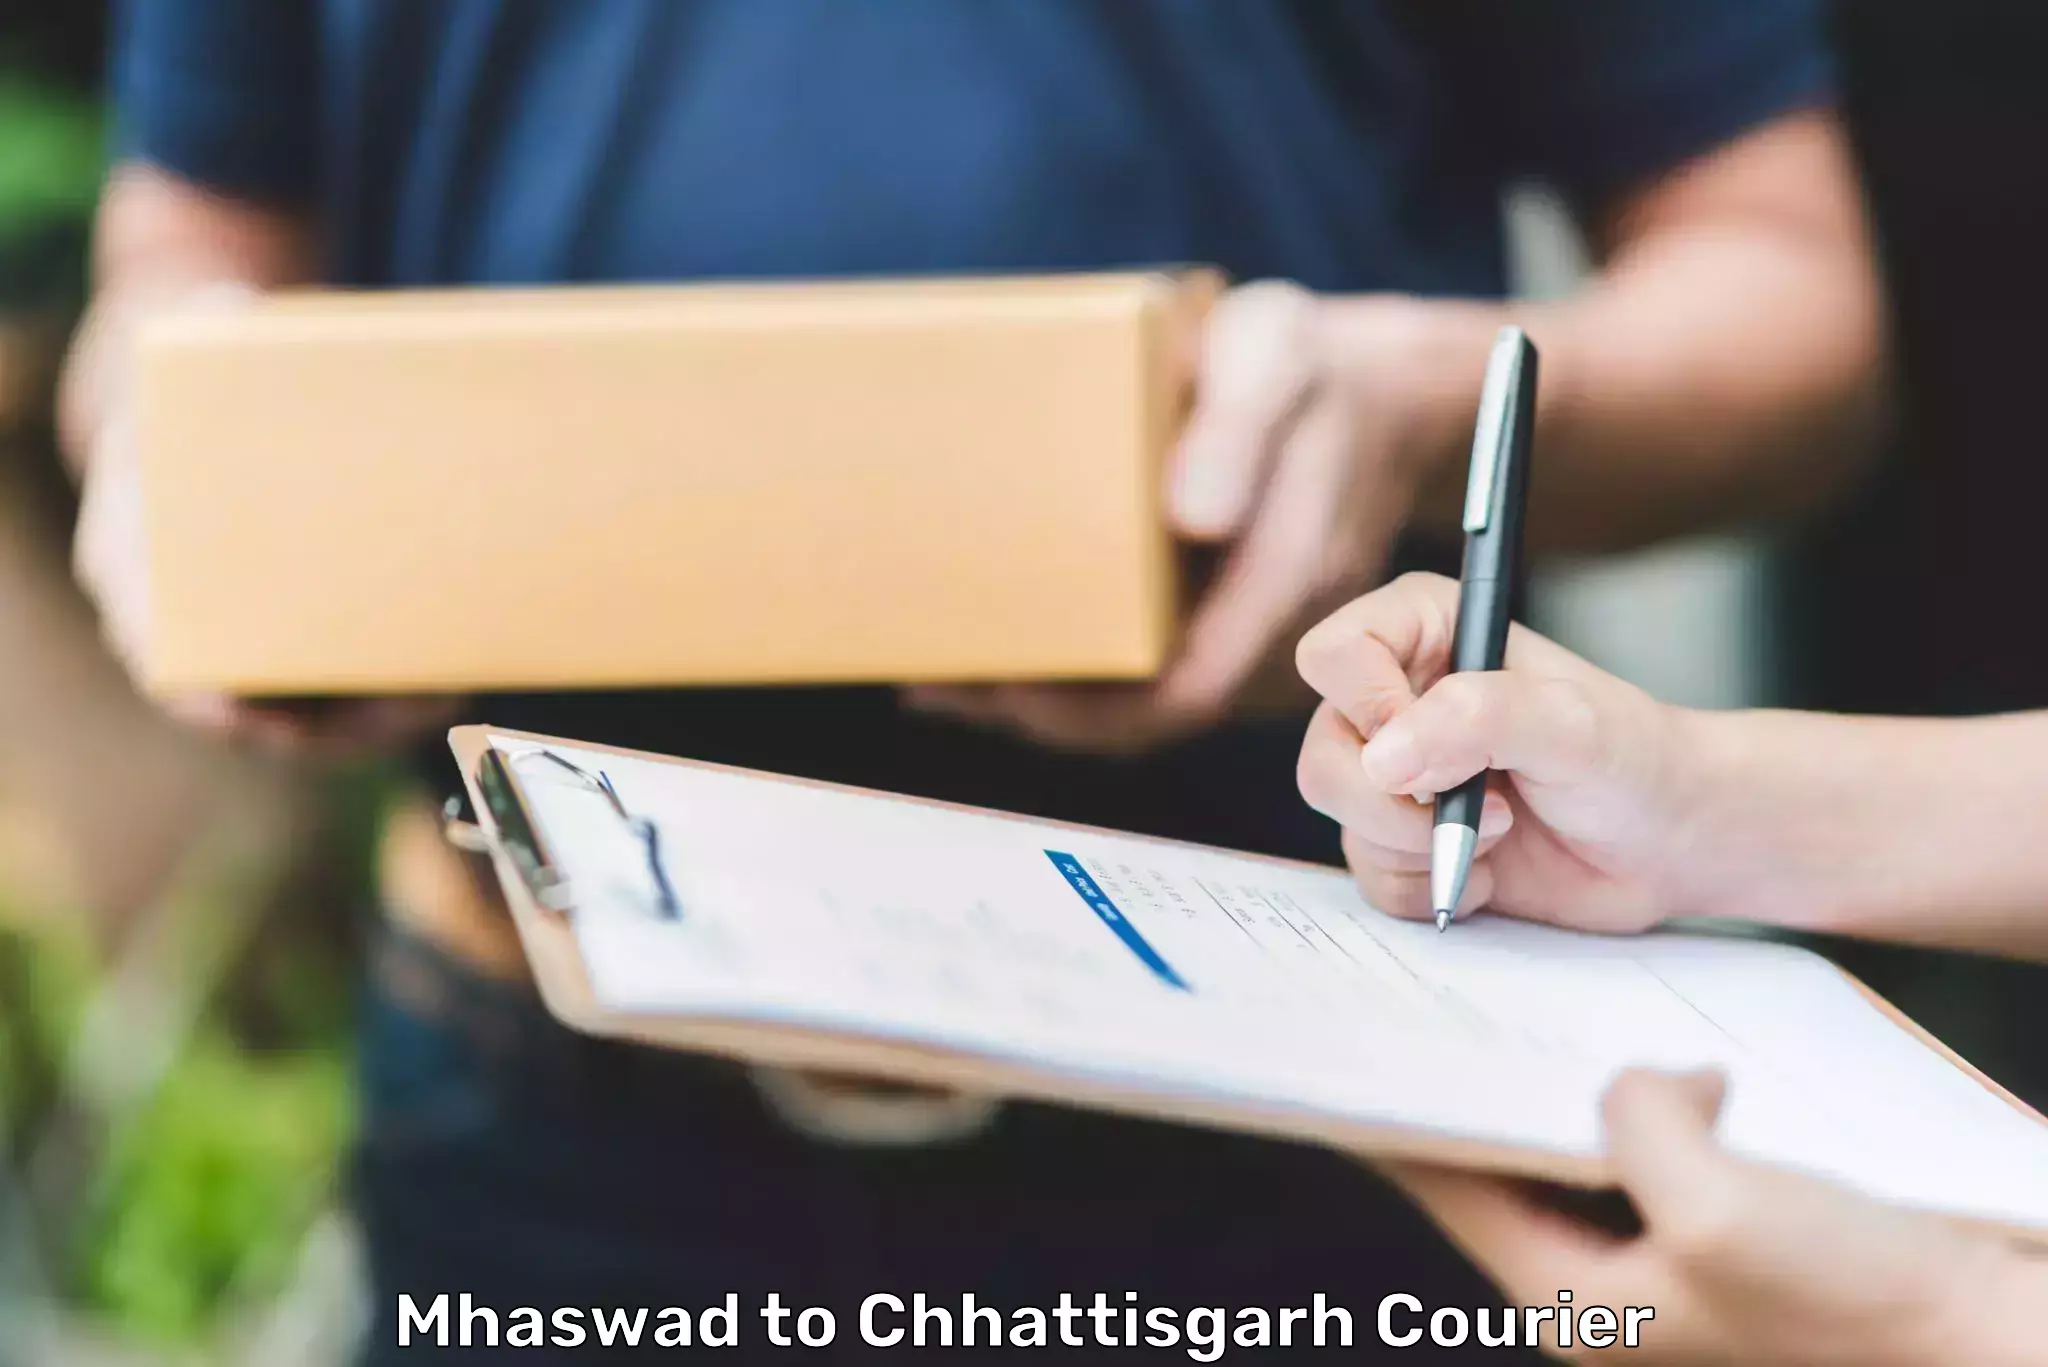 End-to-end delivery Mhaswad to Raigarh Chhattisgarh